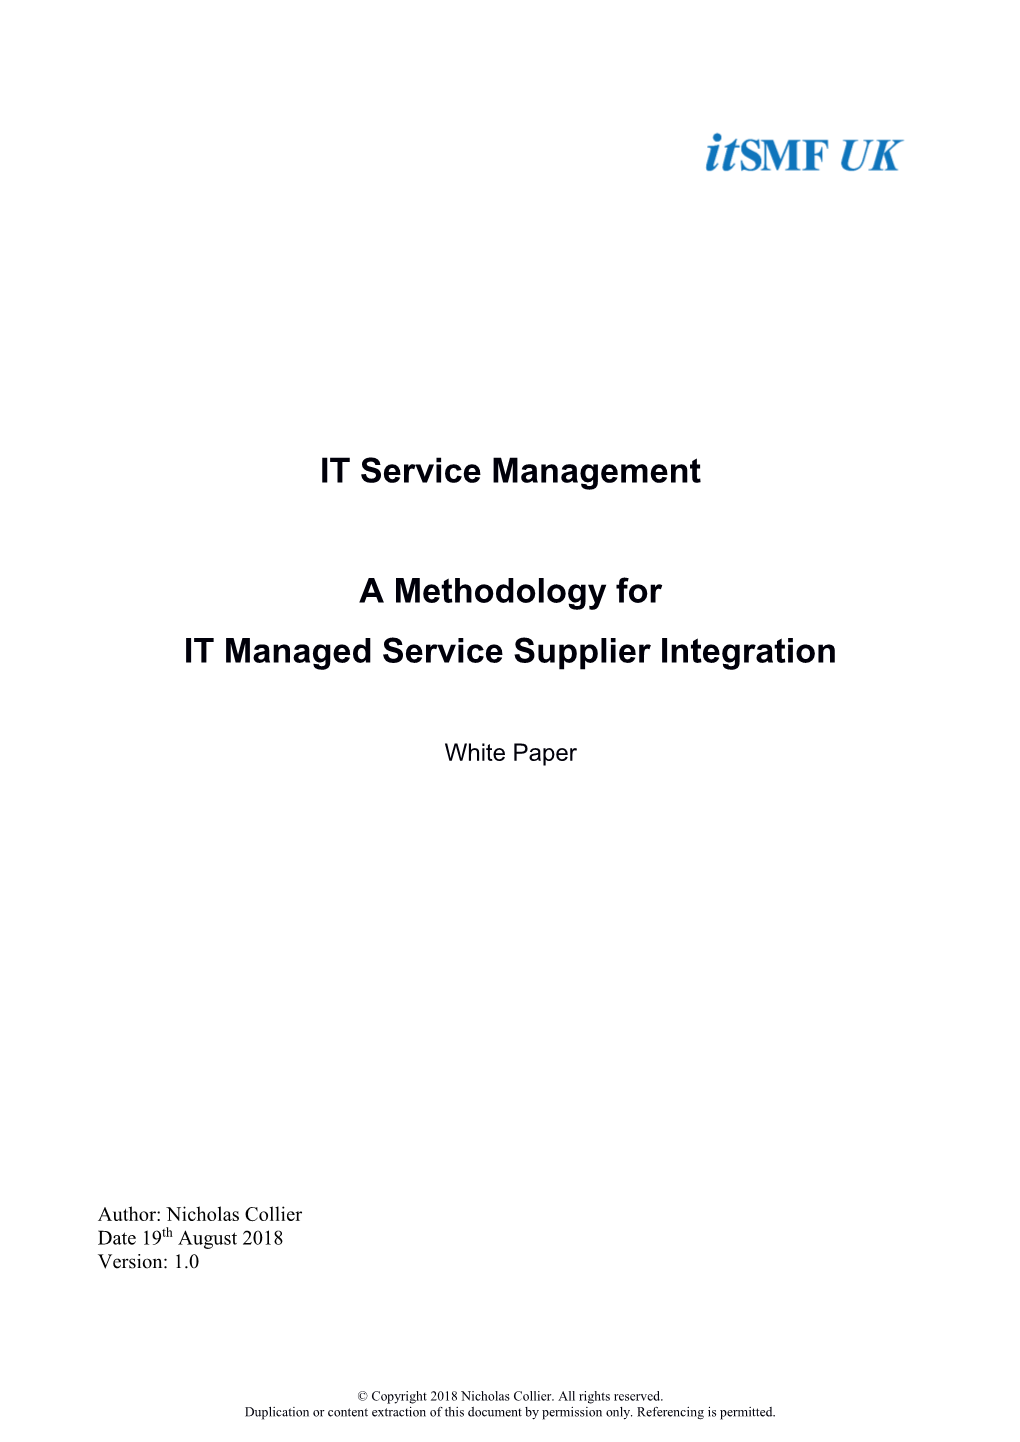 IT Service Management a Methodology for IT Managed